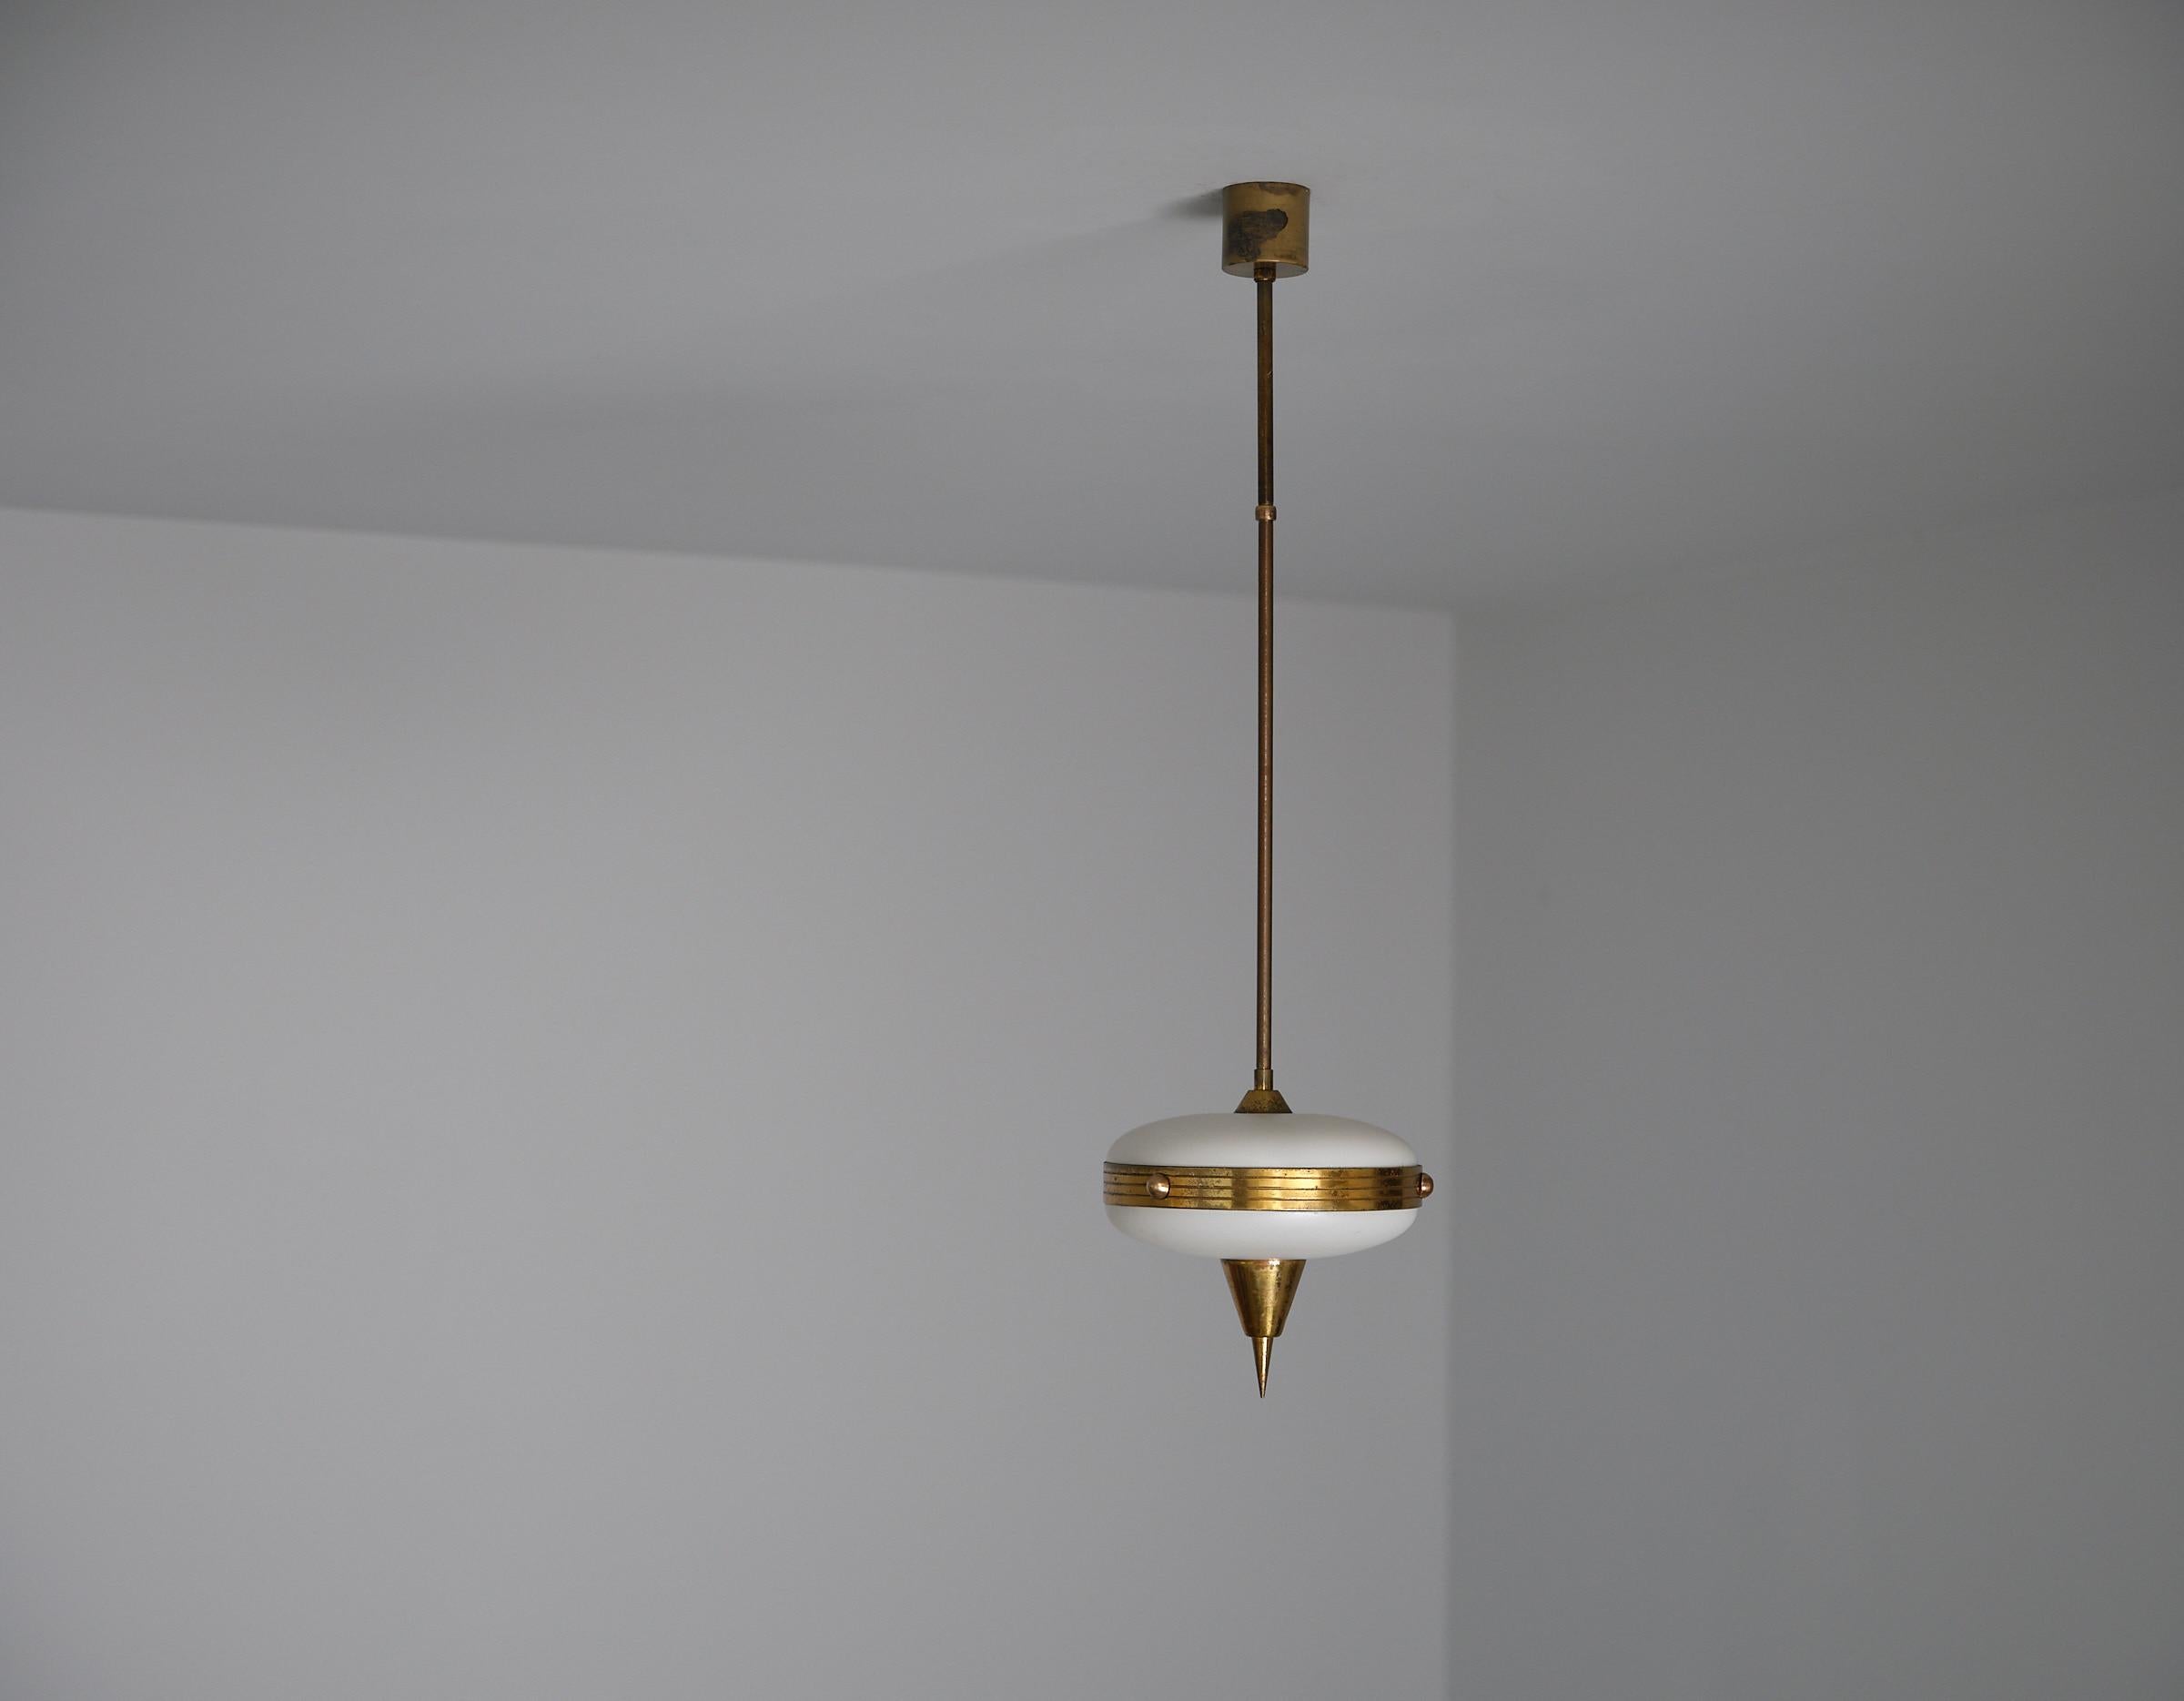 Petite Italian Brass and Opaline Pendant Lamp – 1950s Modernist In Good Condition For Sale In Rome, IT